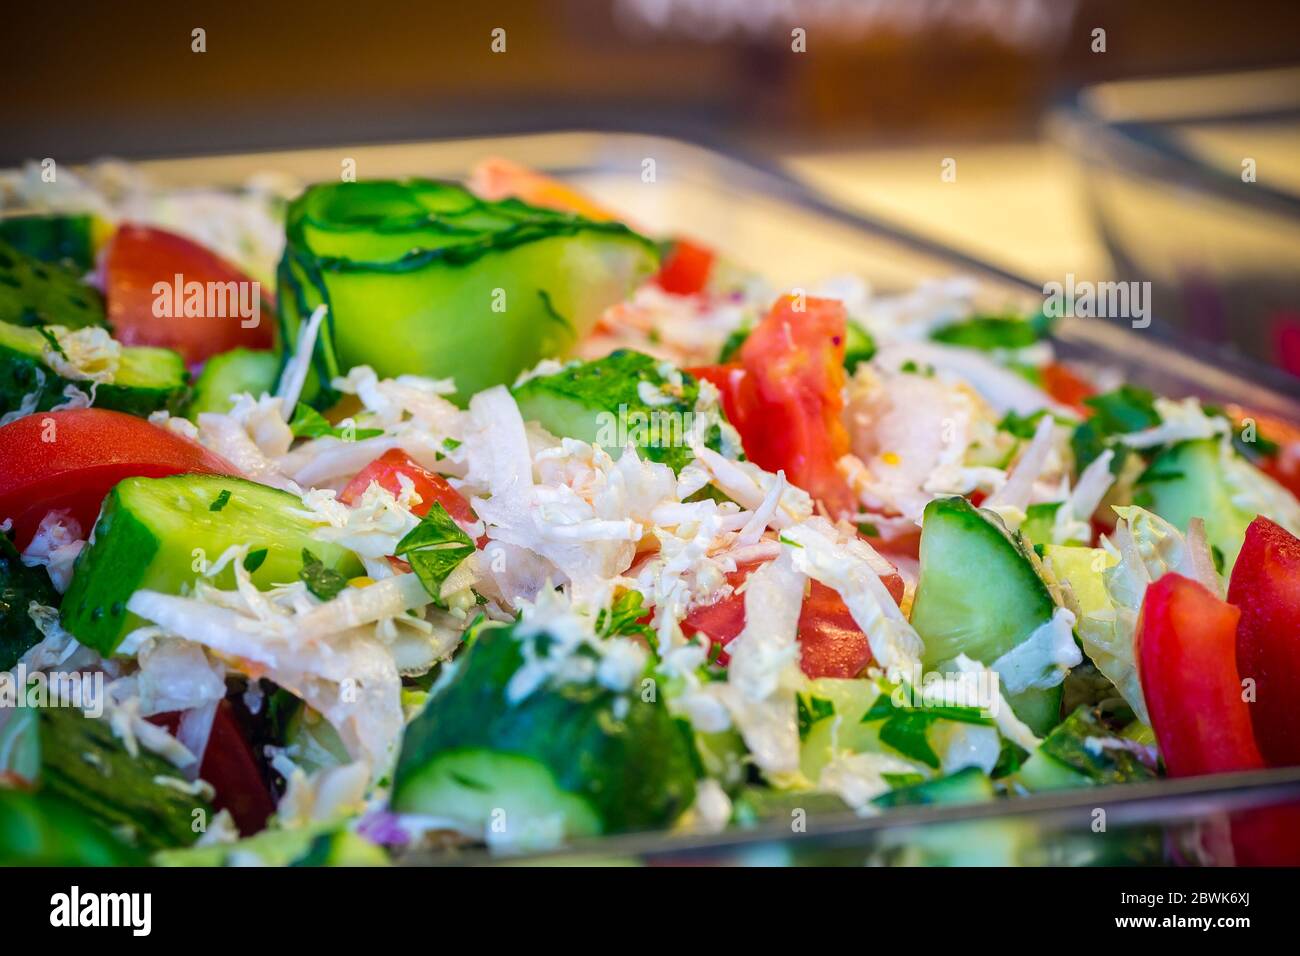 Served tasty vegeterian meal close up view Stock Photo